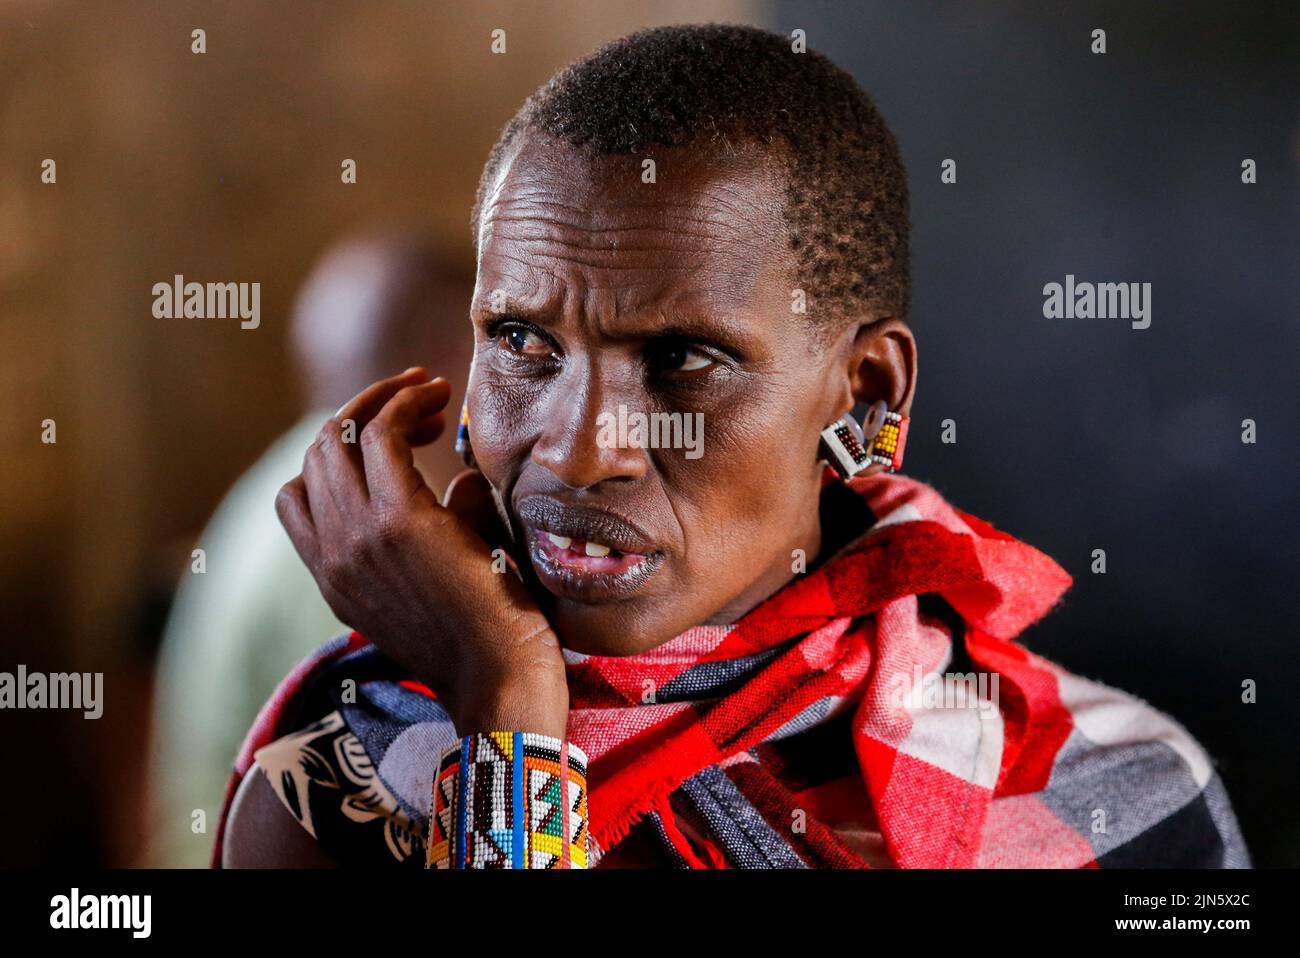 A Maasai traditional woman waits near a voting booth at a polling centre before casting her ballot during the general election by the Independent Electoral and Boundaries Commission (IEBC) in Ewaso Kedong primary school, in Kajiado county, Kenya August 9, 2022. REUTERS/Thomas Mukoya Stock Photo